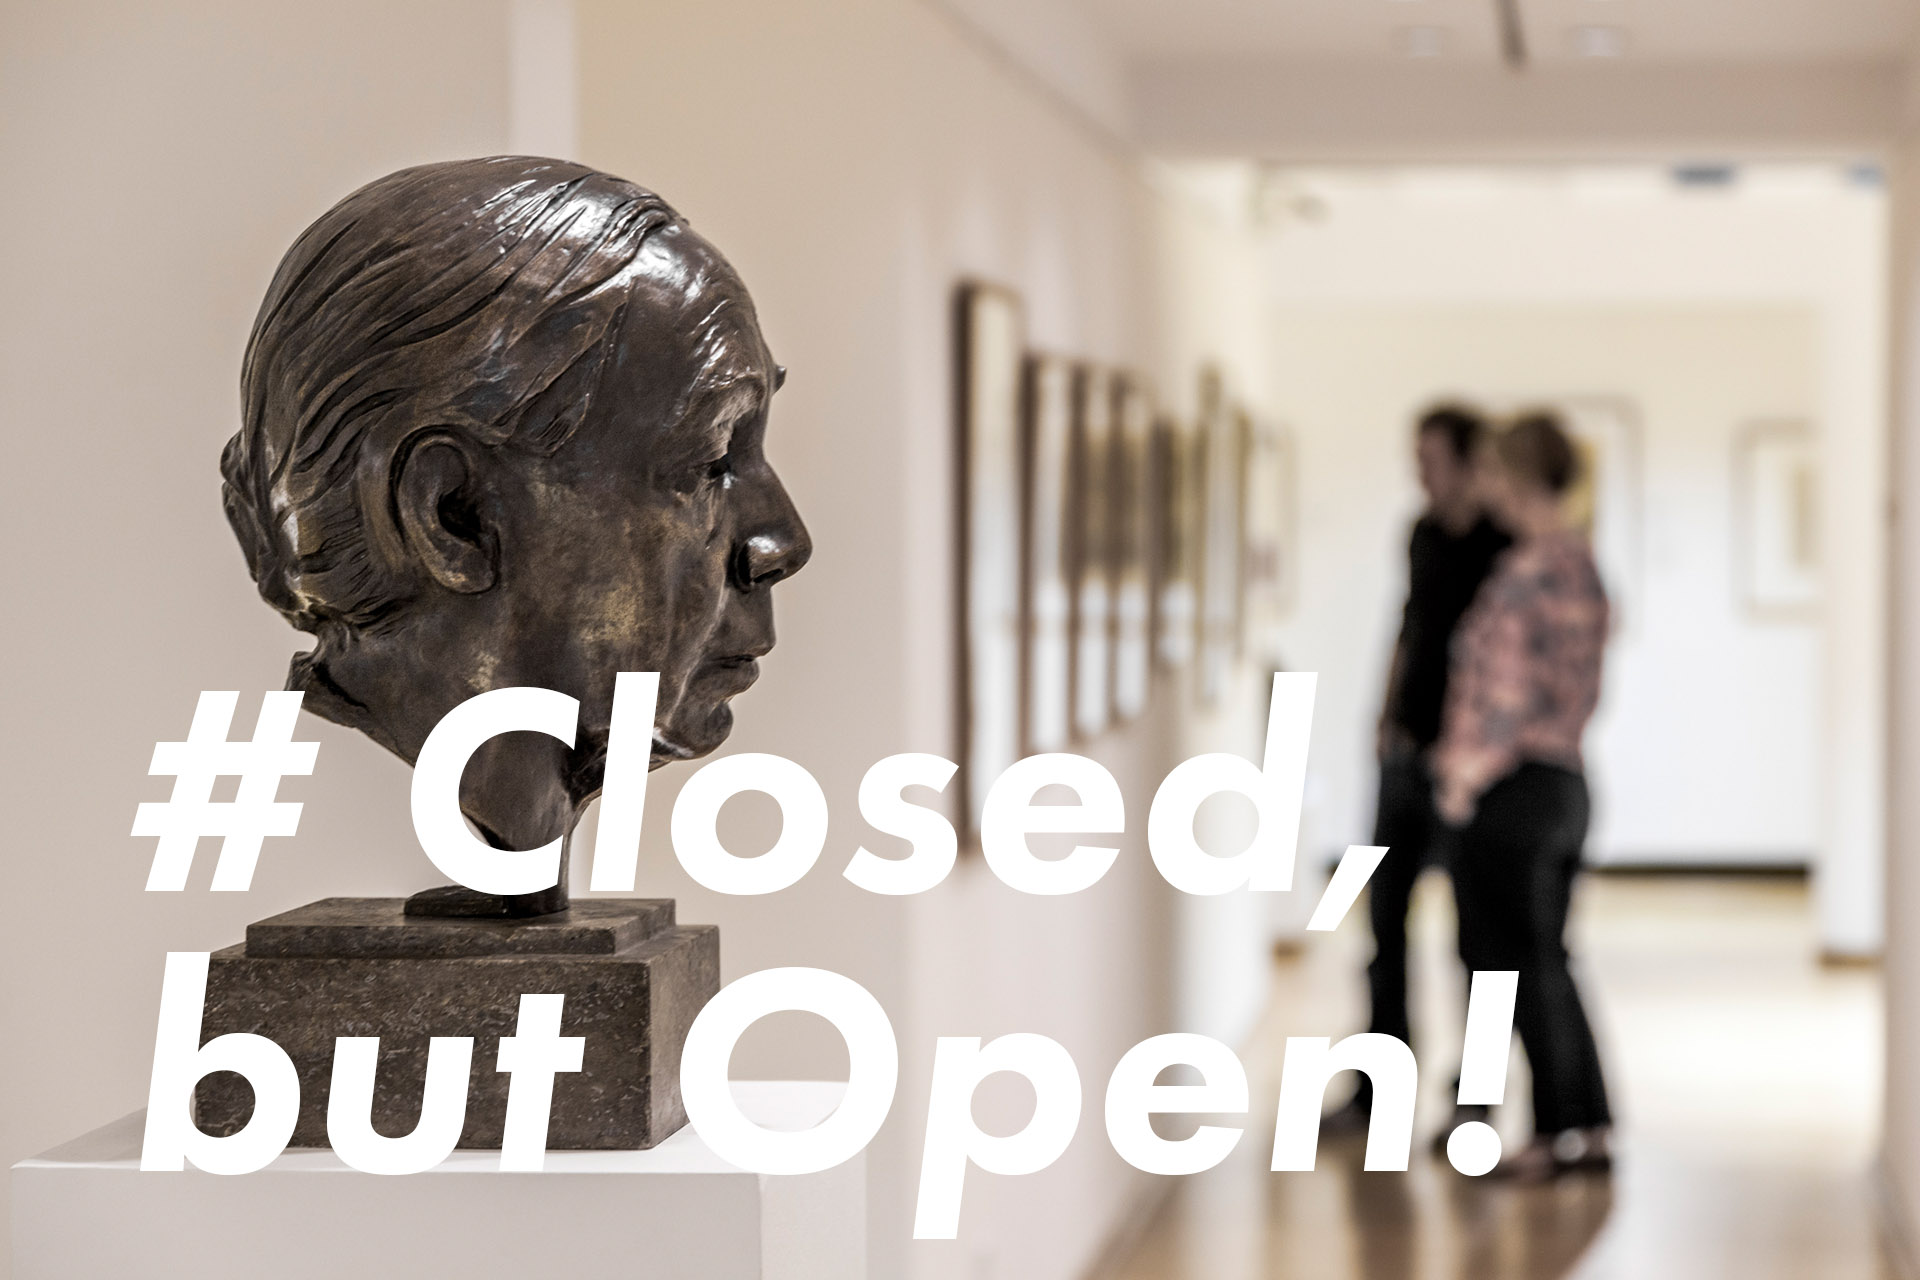 #Closed, but Open!